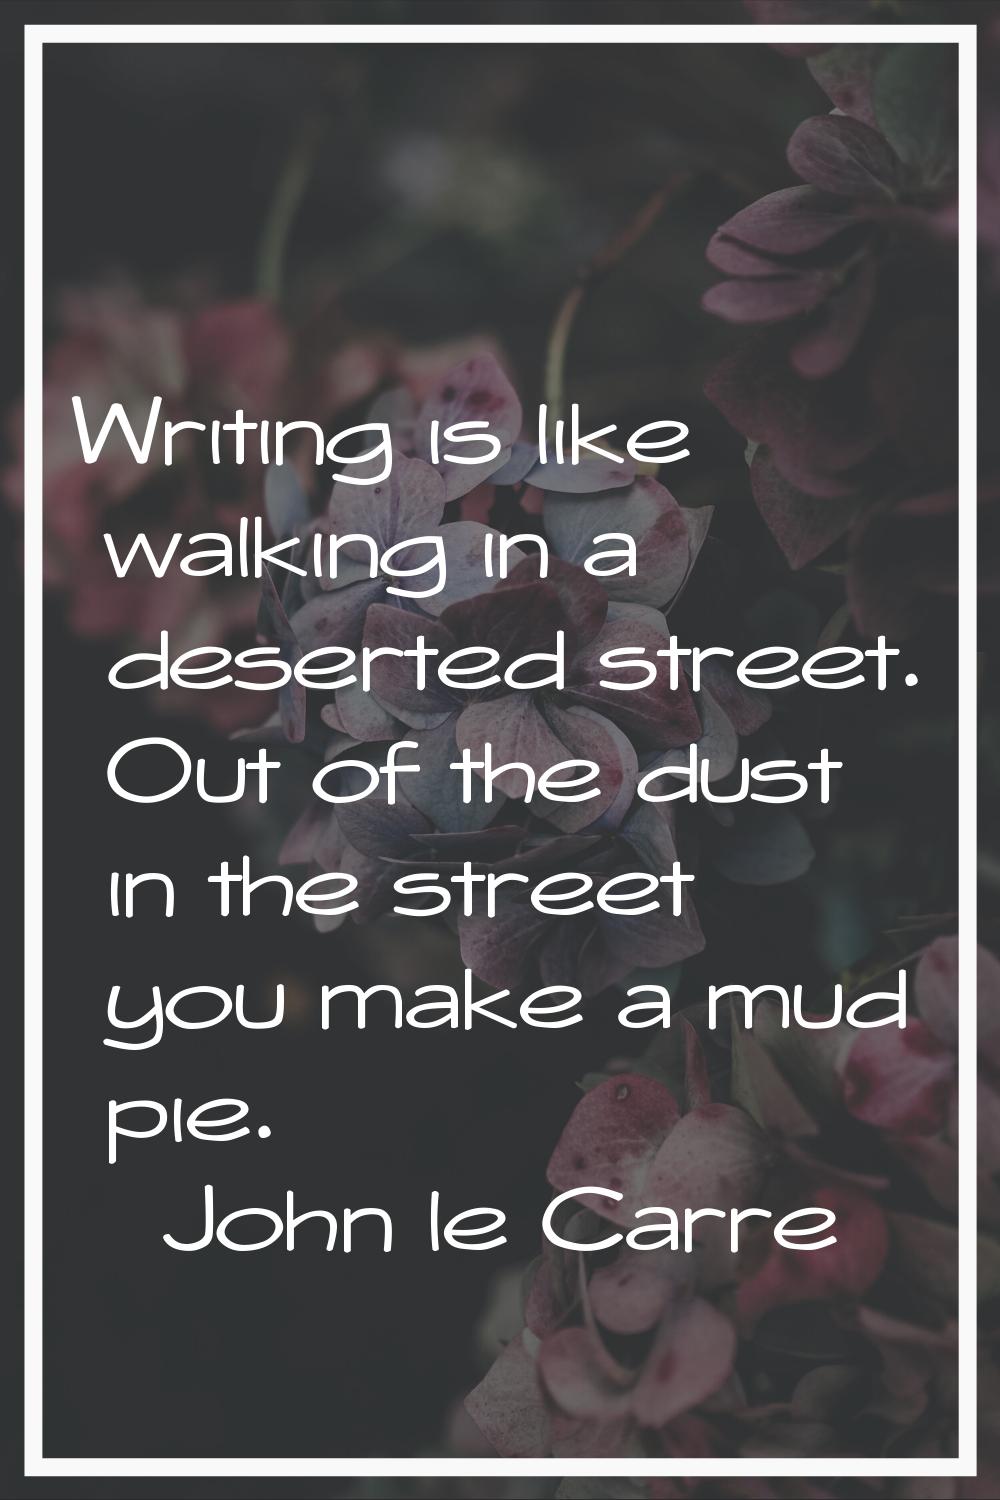 Writing is like walking in a deserted street. Out of the dust in the street you make a mud pie.